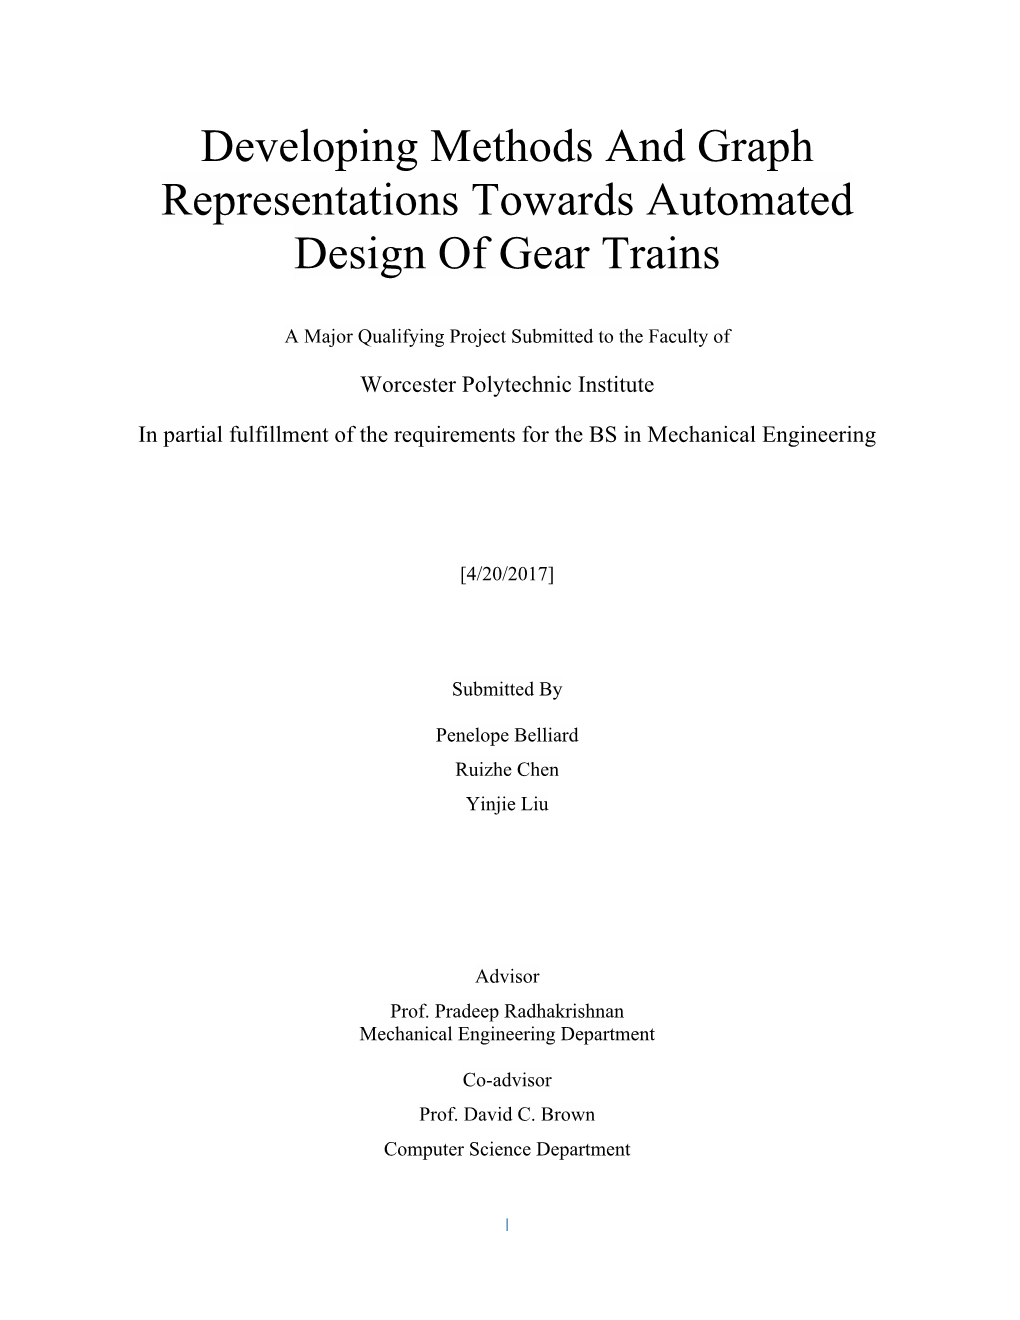 Developing Methods and Graph Representations Towards Automated Design of Gear Trains